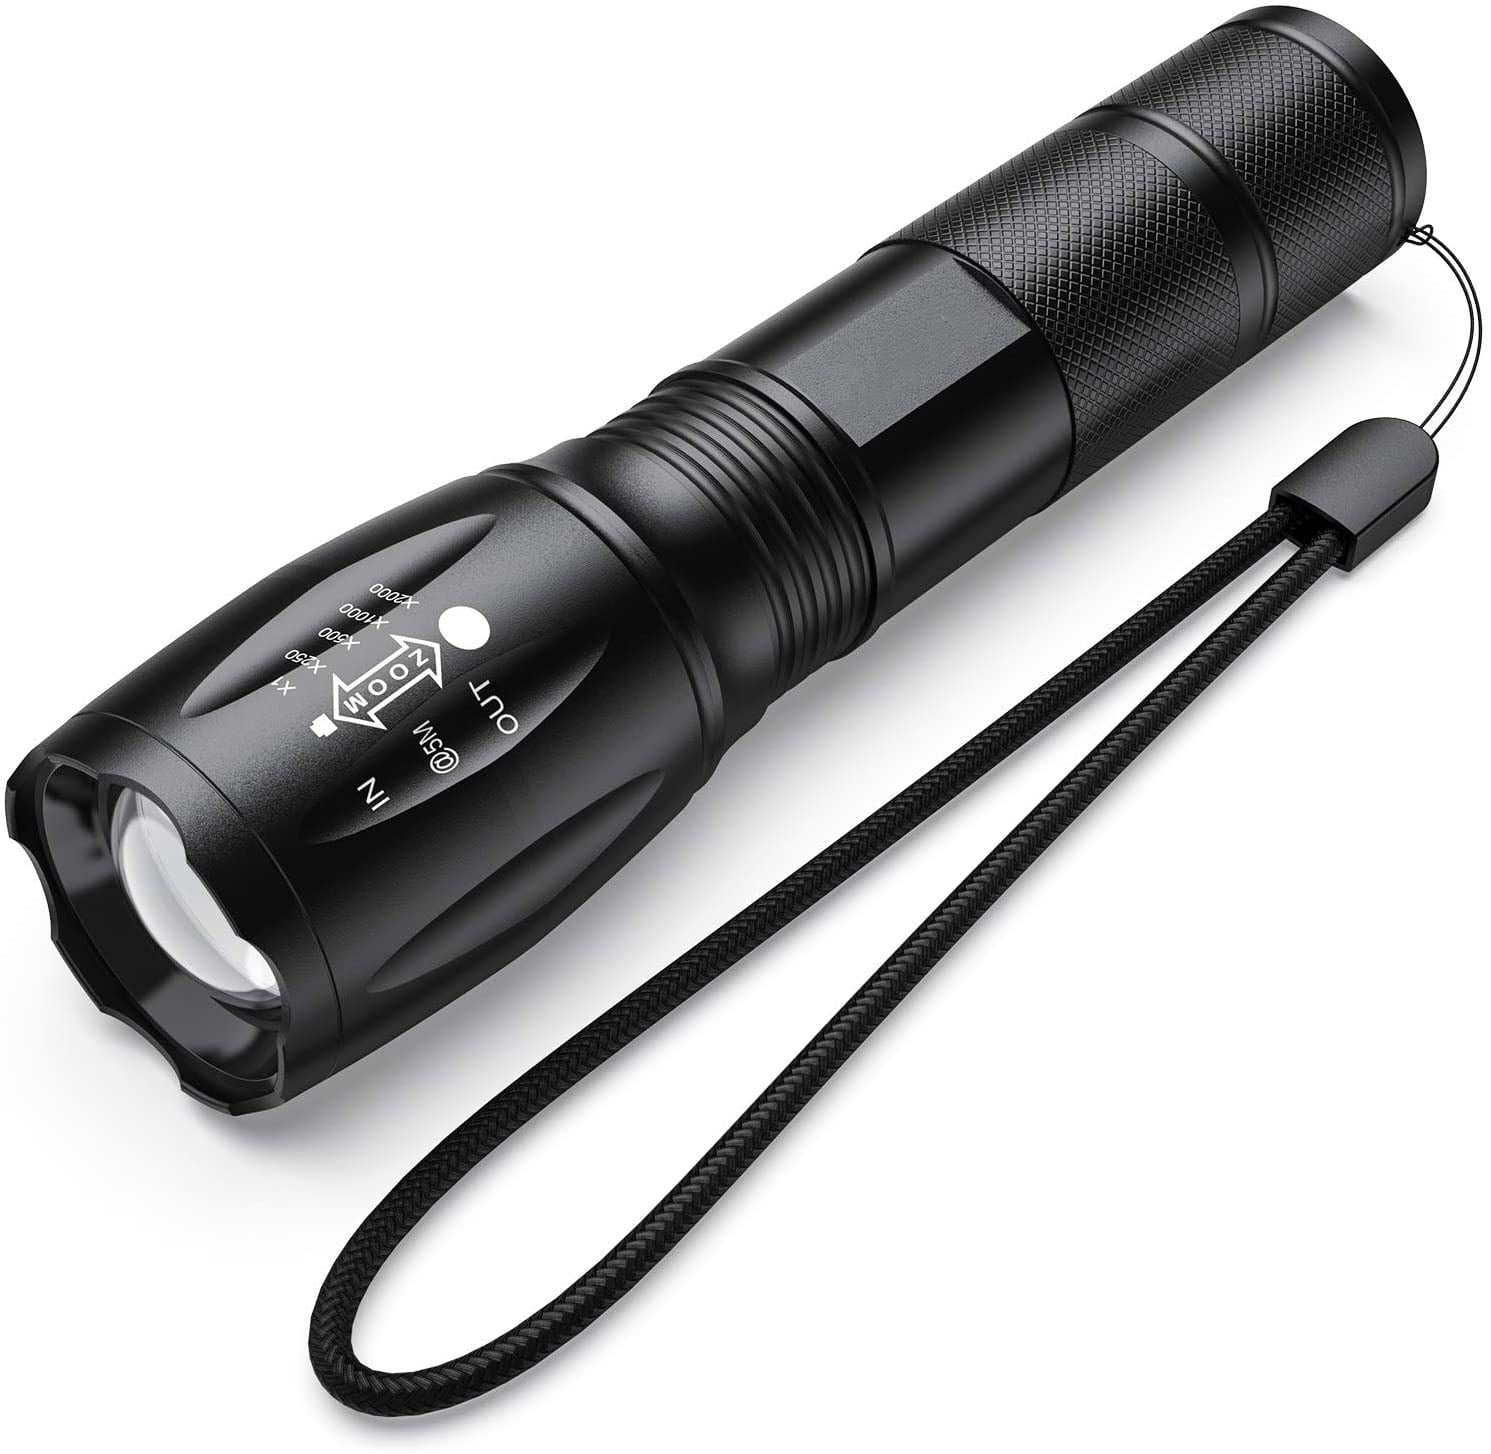 Tactical 18650 Flashlight T6 LED High Powered 5Modes Zoomable Aluminum 